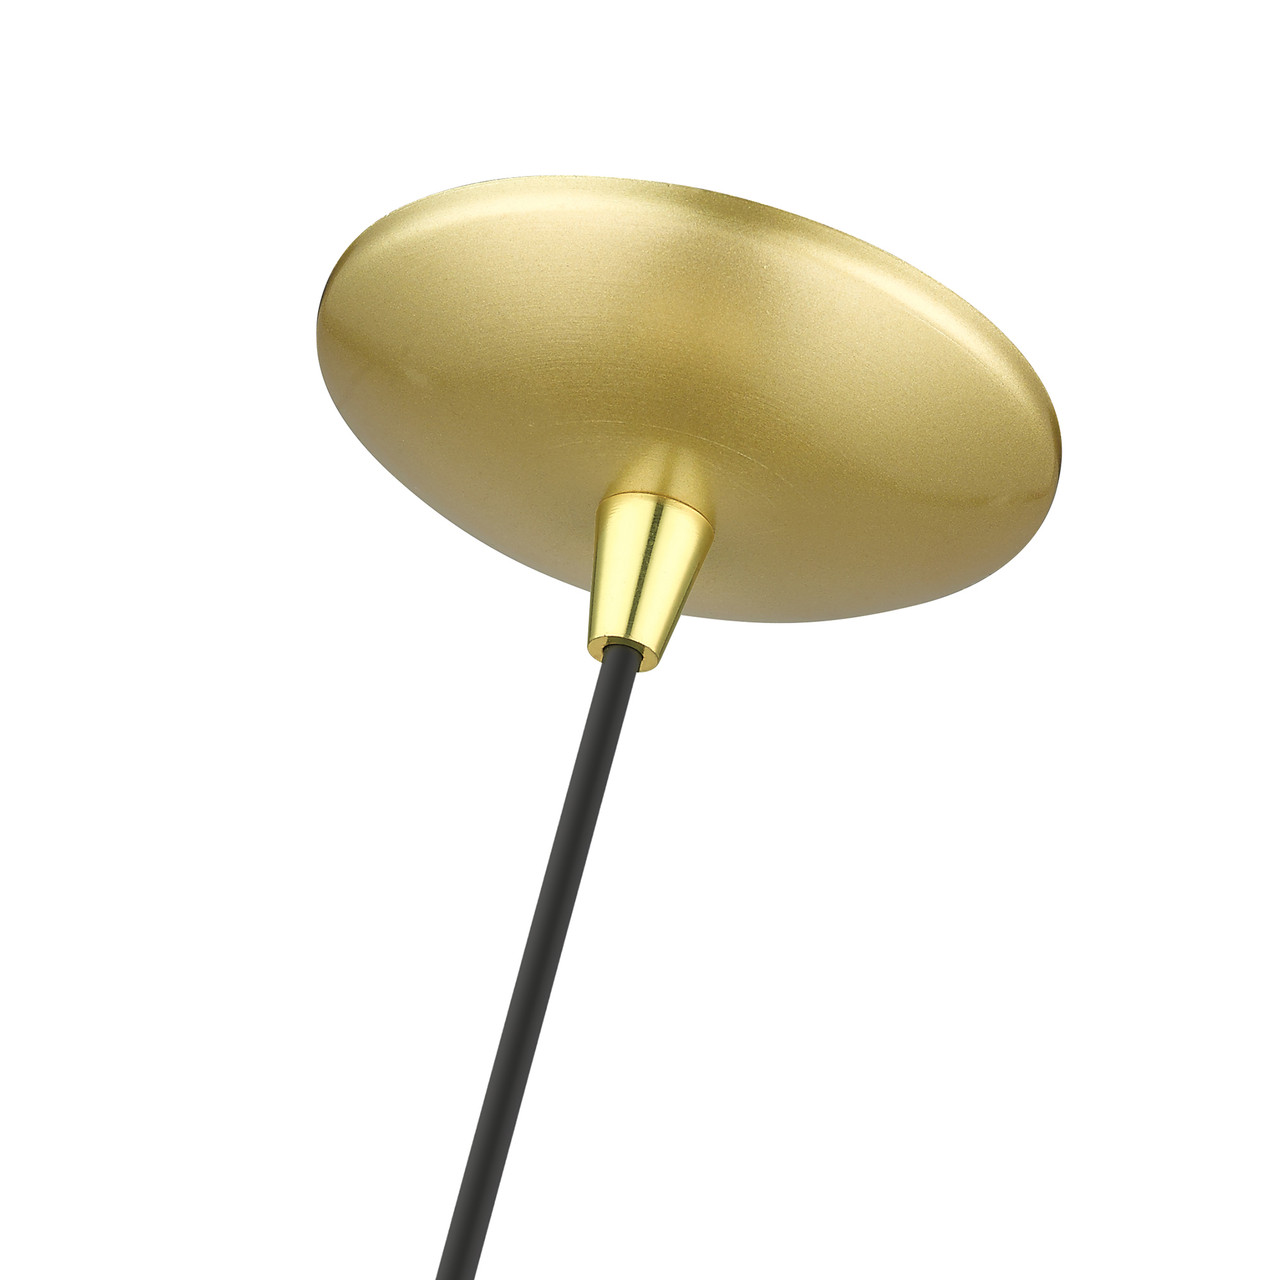 LIVEX LIGHTING 41186-33 1 Light Soft Gold Pendant with Polished Brass Finish Accents